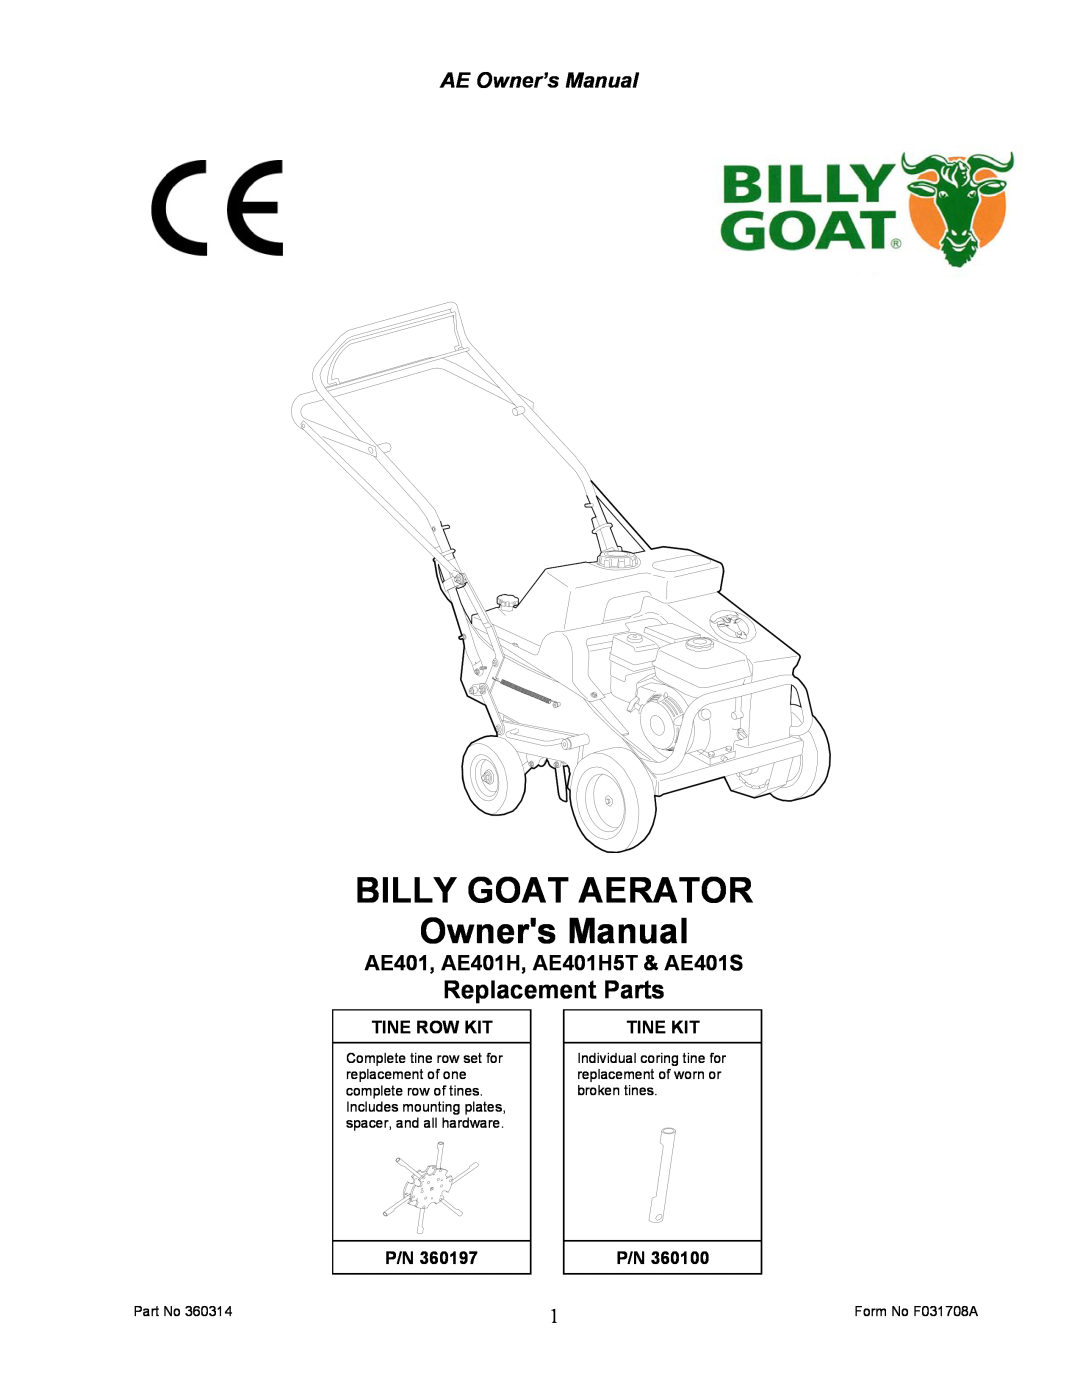 Billy Goat AE401HST owner manual Replacement Parts, AE401, AE401H, AE401H5T & AE401S, Tine Row Kit, Tine Kit 